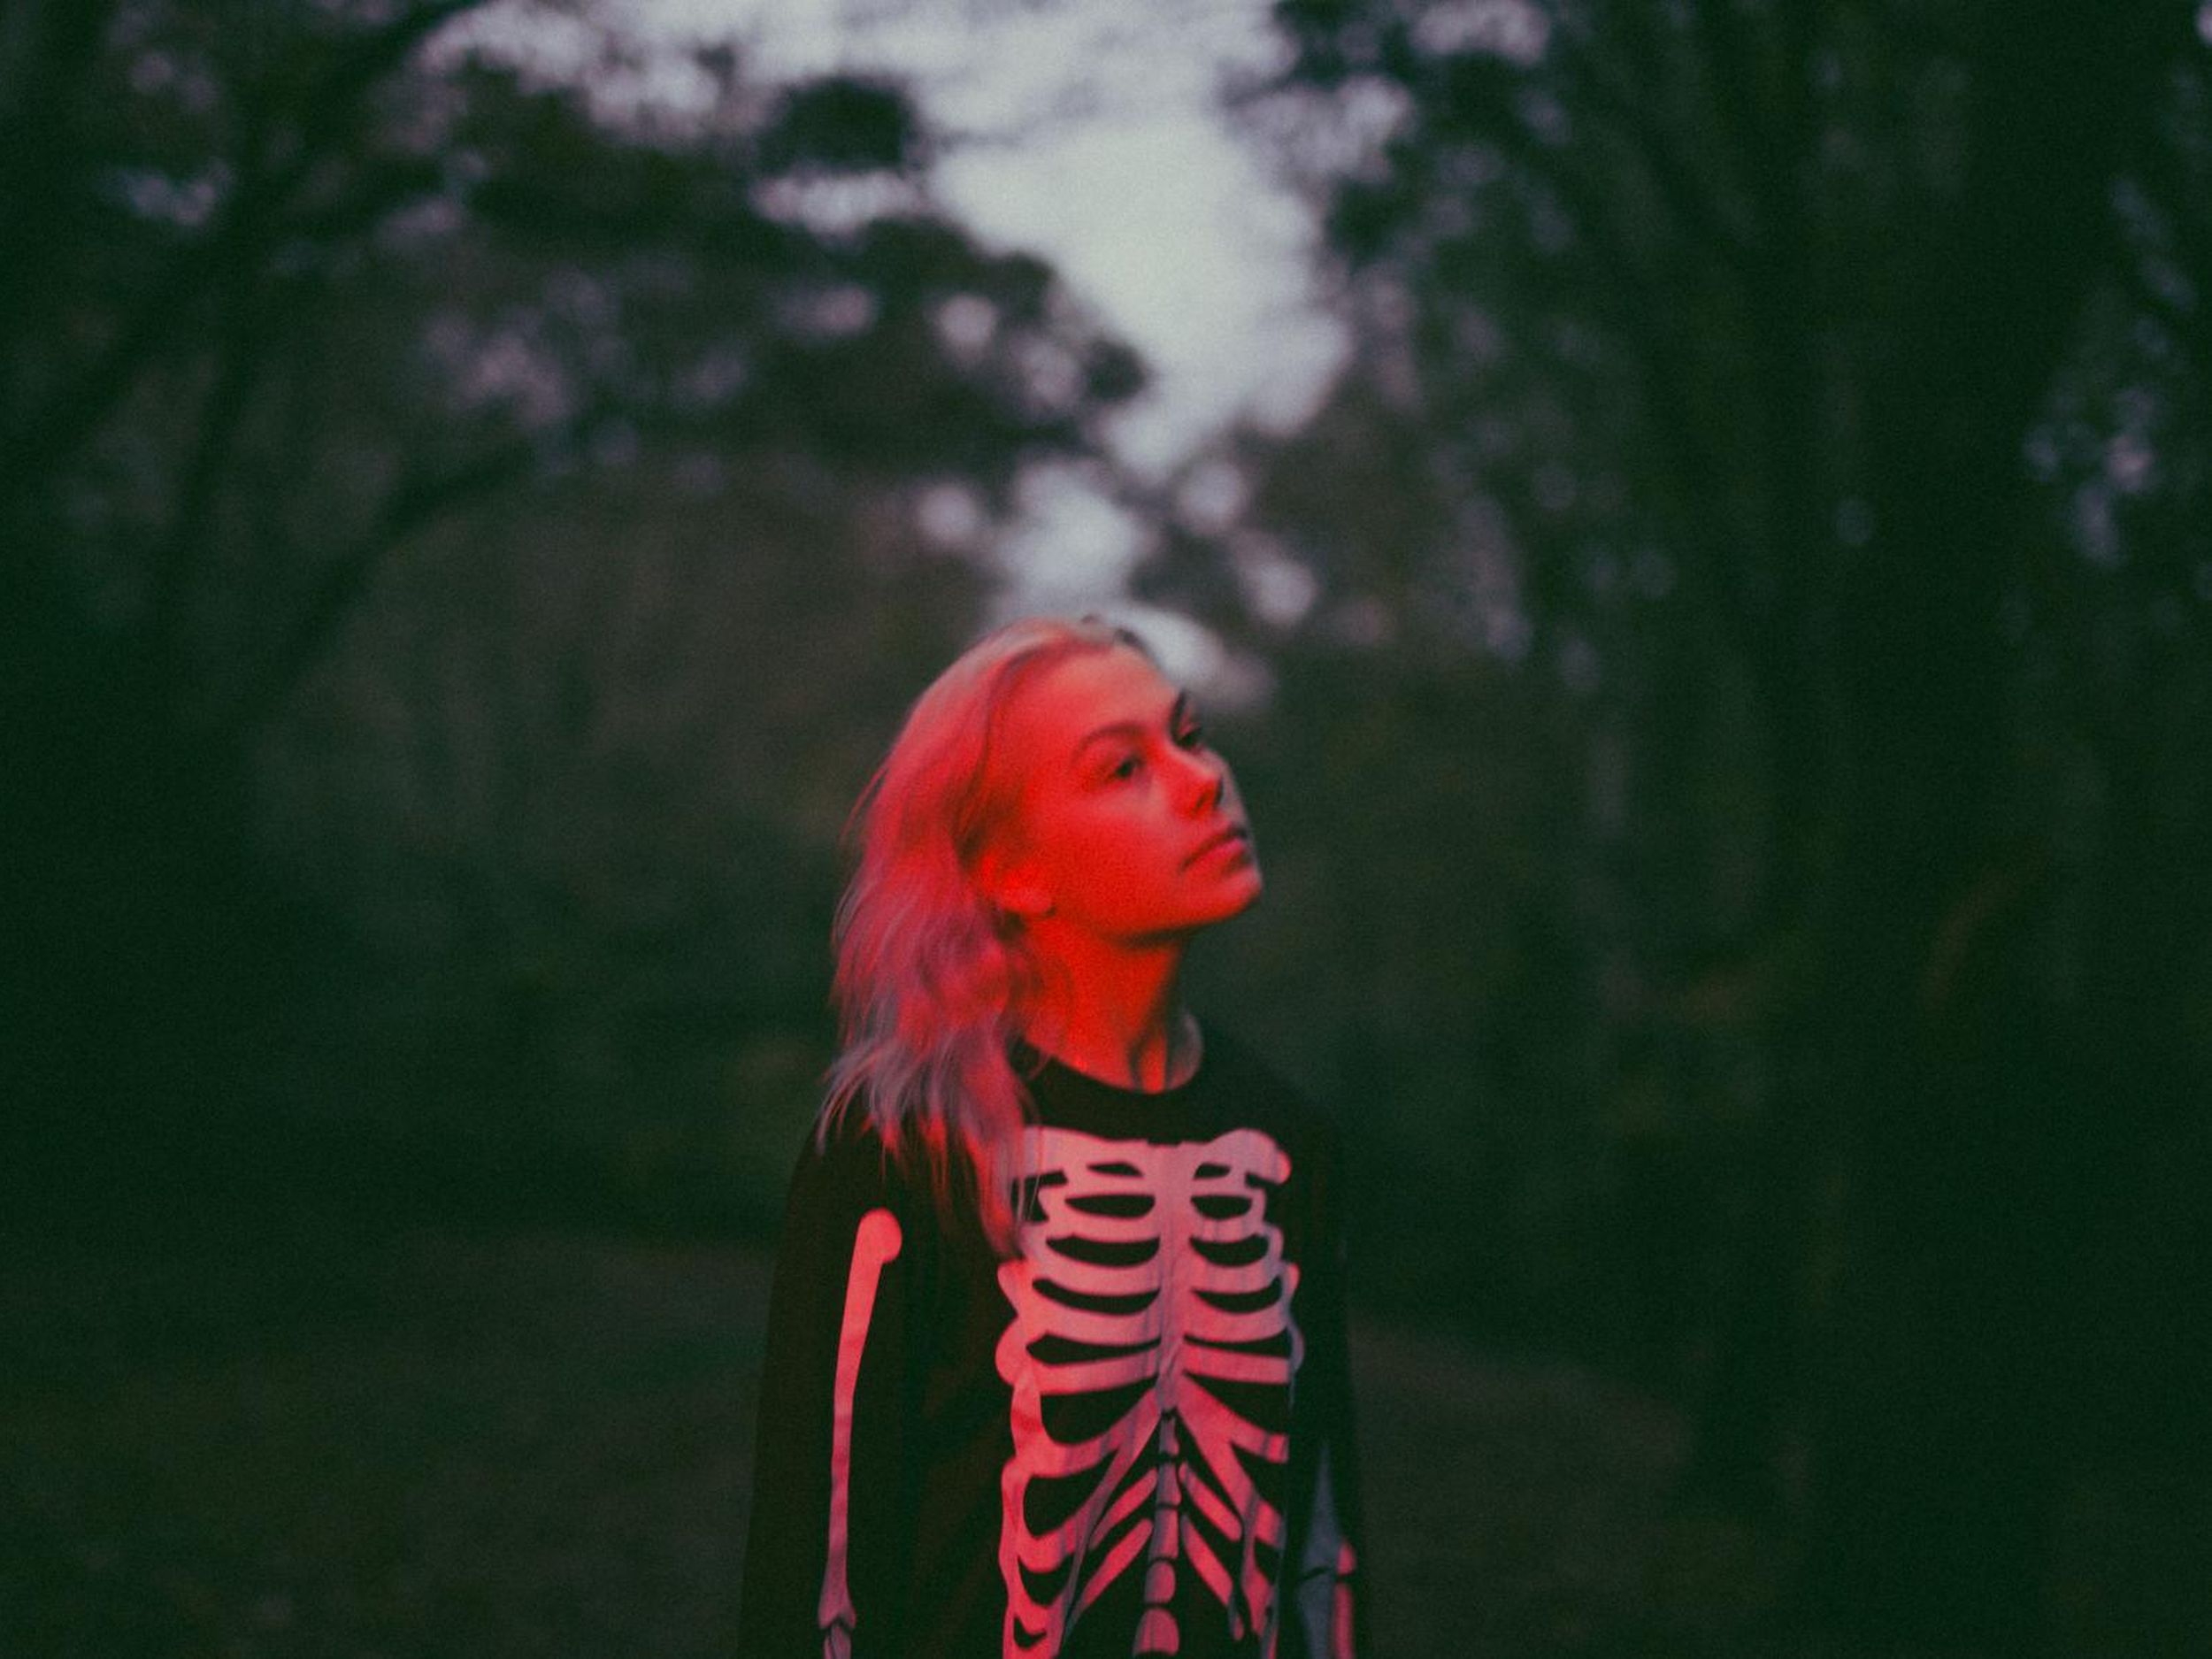 Phoebe Bridgers Weighs Life, Love, and Loss on Punisher